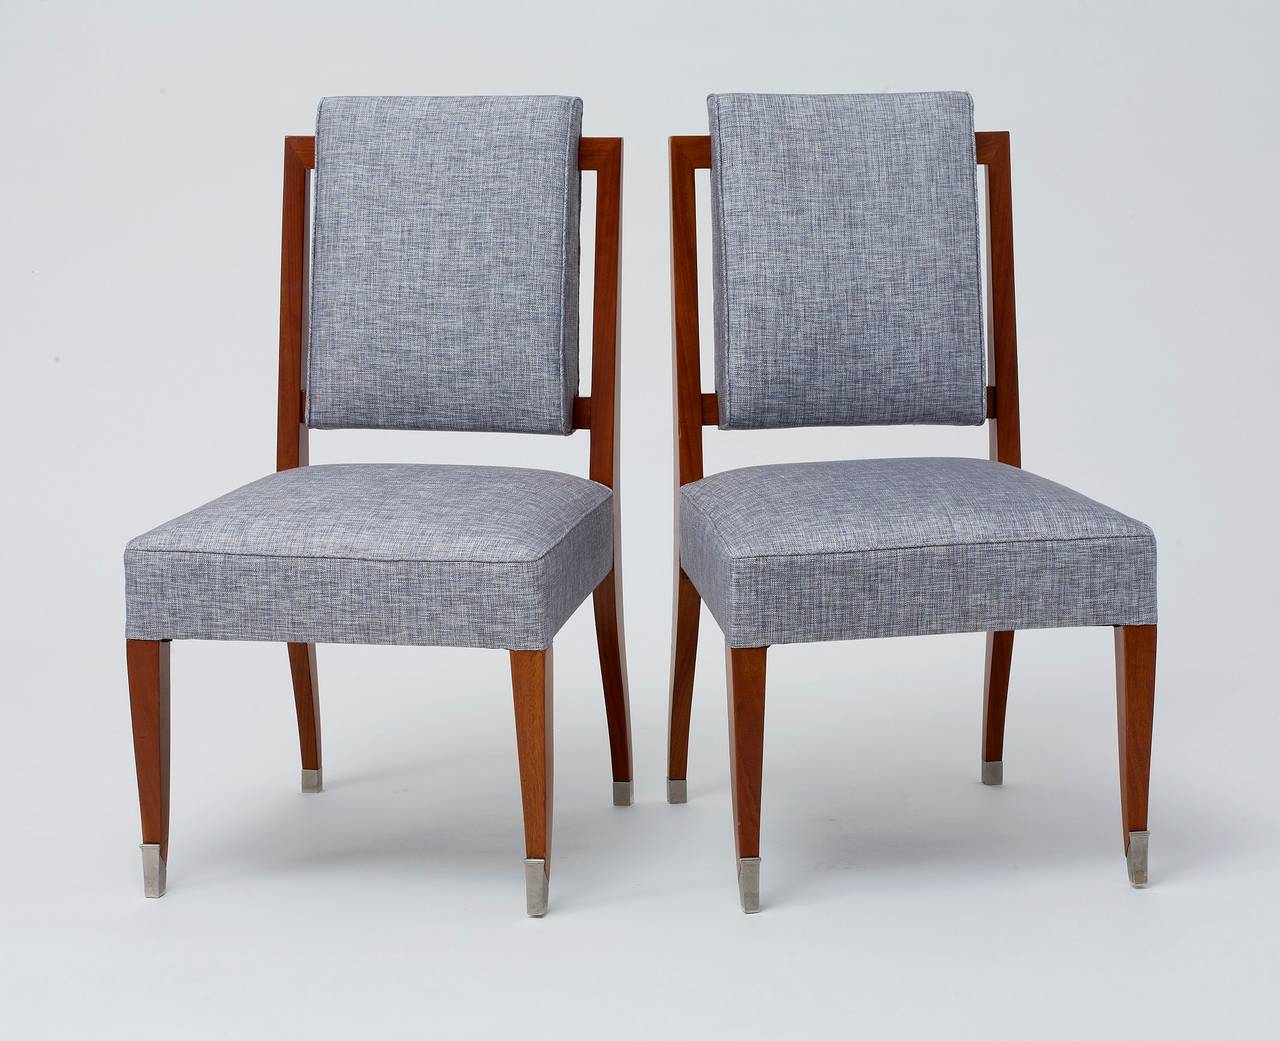 Pair of mahogany side chairs with nickel-plated bronze sabots by Maison Leleu.